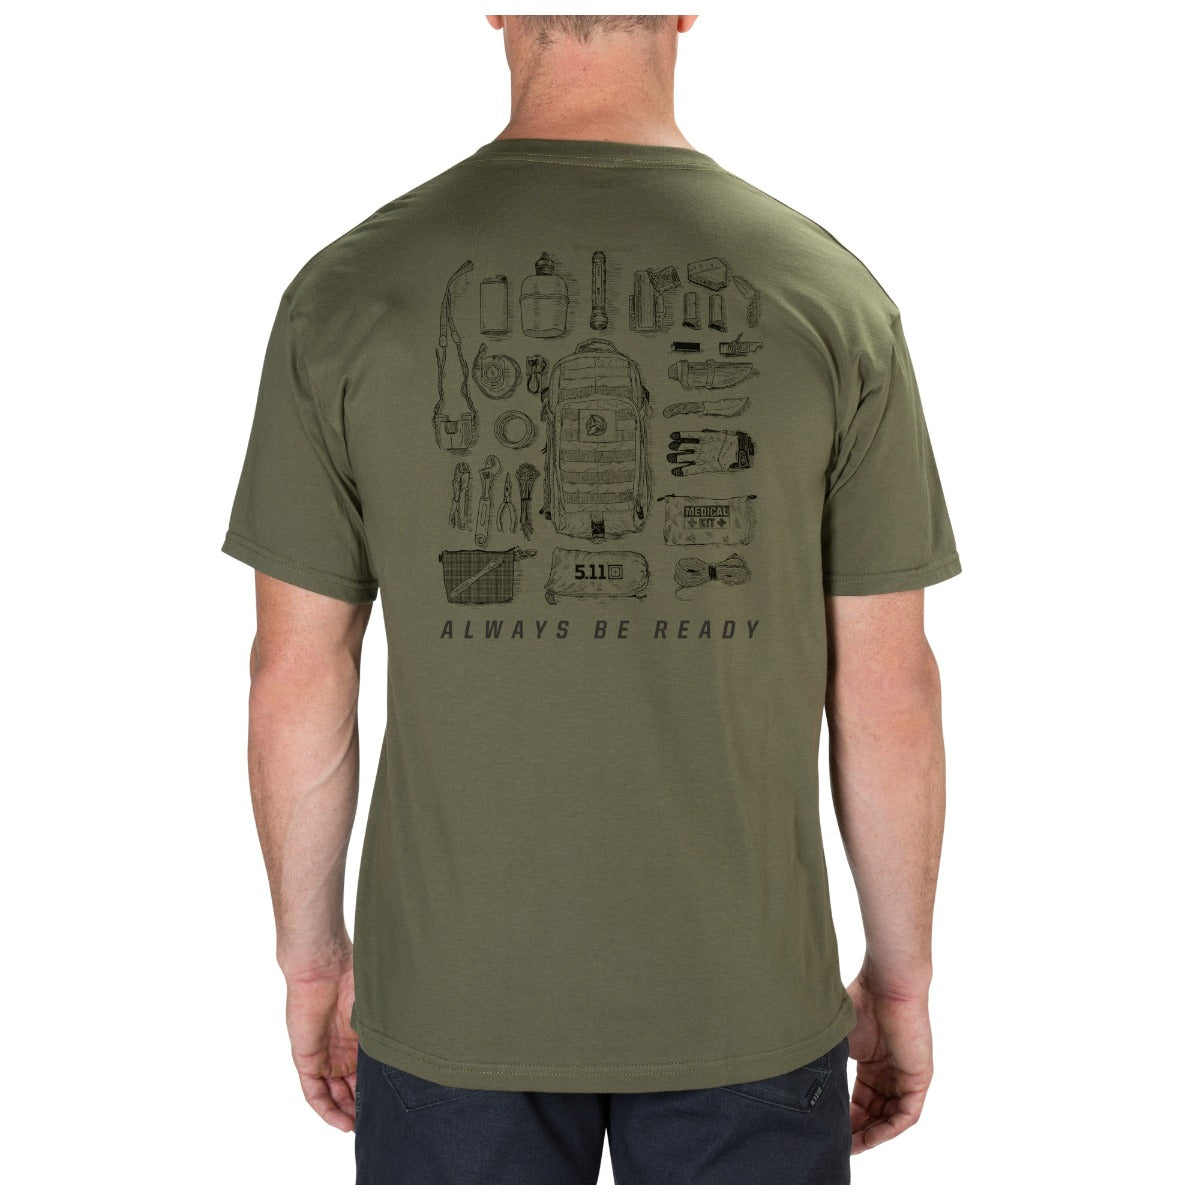 76028 - Load Out T-Shirt